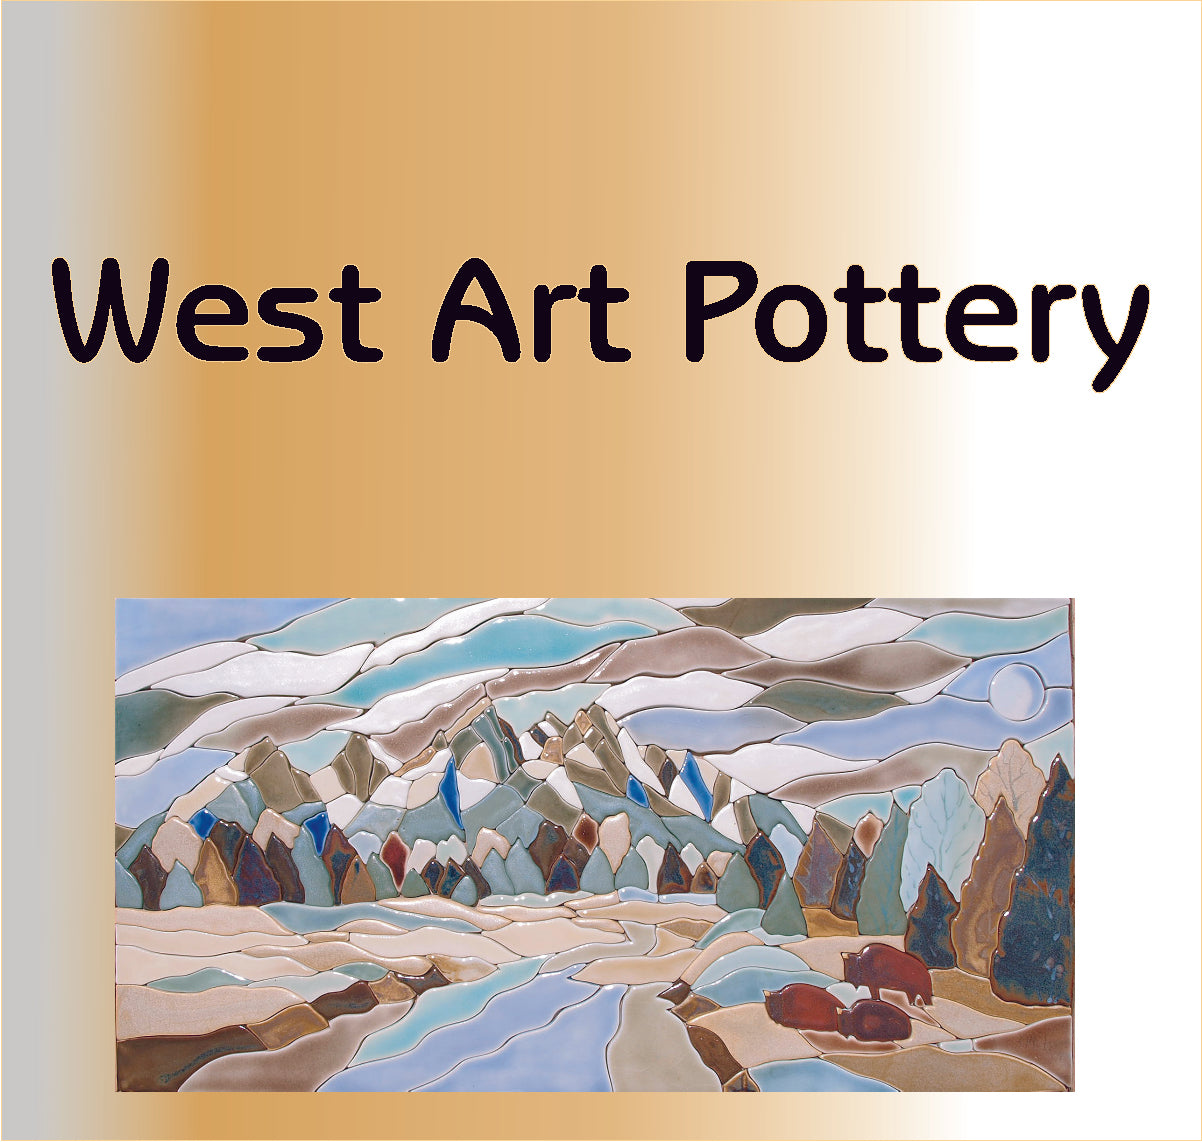 West Art Pottery: bowls, mugs, fashion jewelry pendants, holiday ornaments, chip and dip platters, plates, jars, art tile murals, and large platters. Coming soon: souvenir holiday ornaments with names of  western towns.